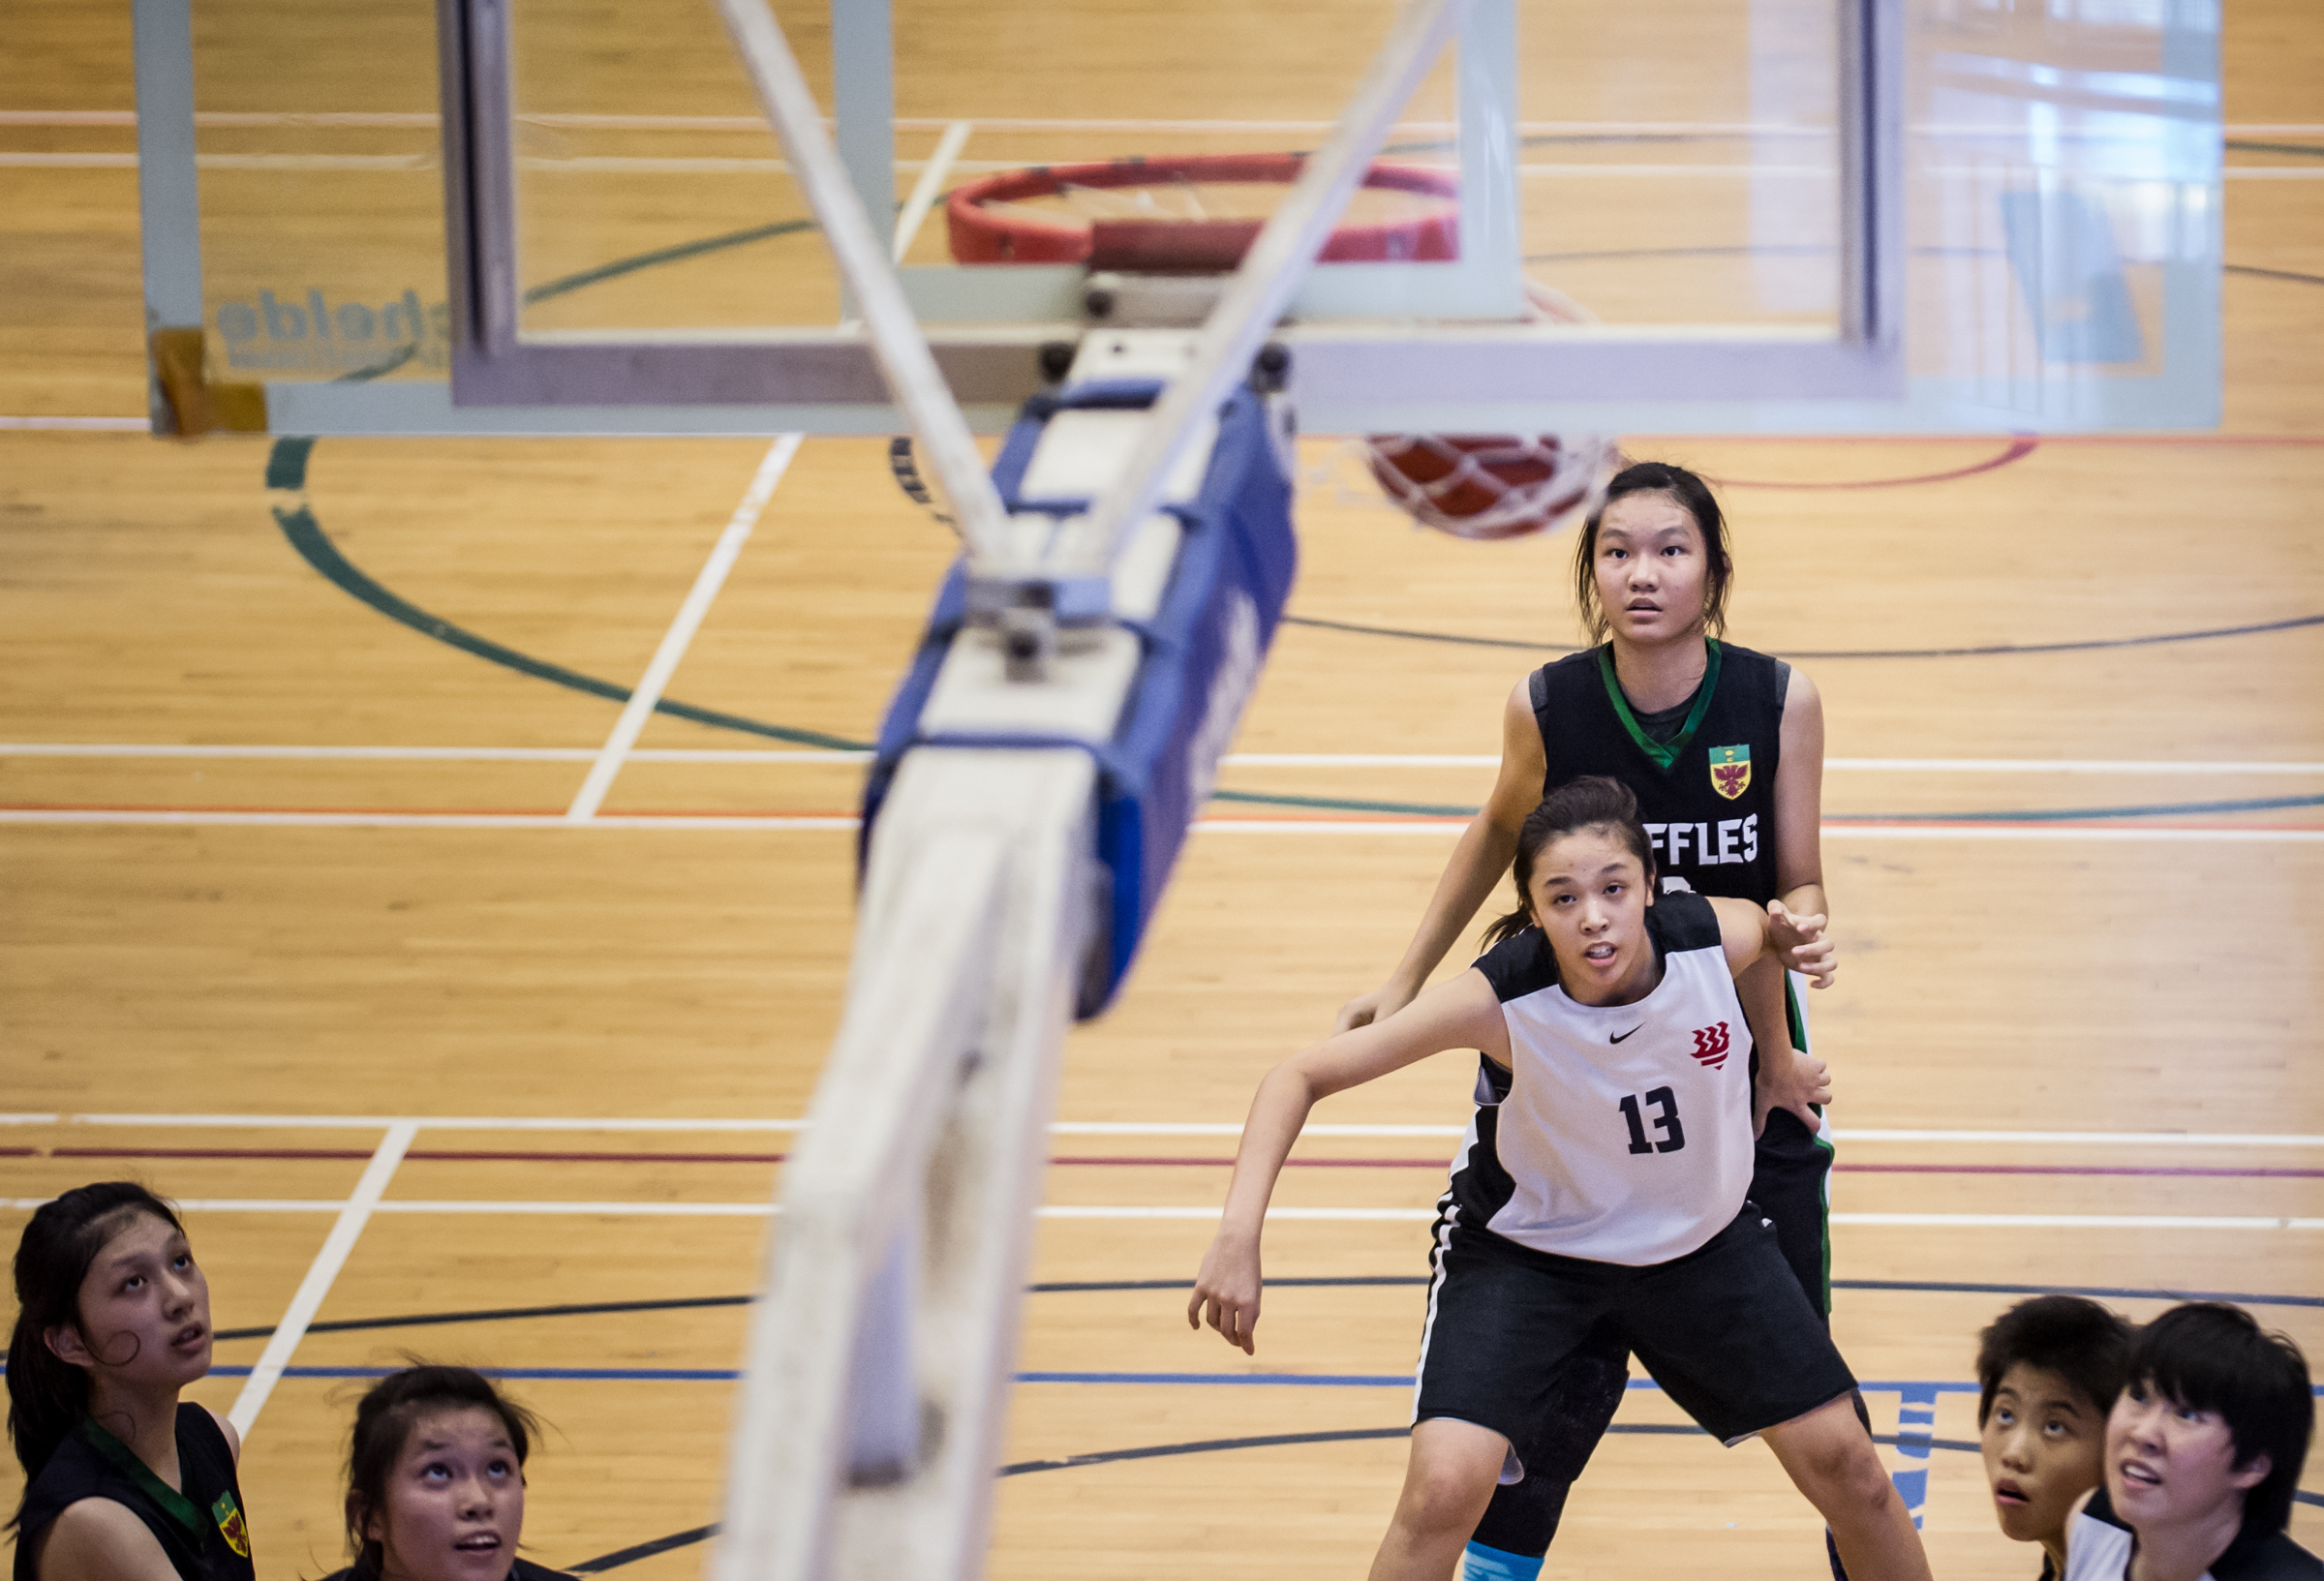 Basketball players watch as the ball makes the basket during a National Schools match at the Jurong East Sports Complex.